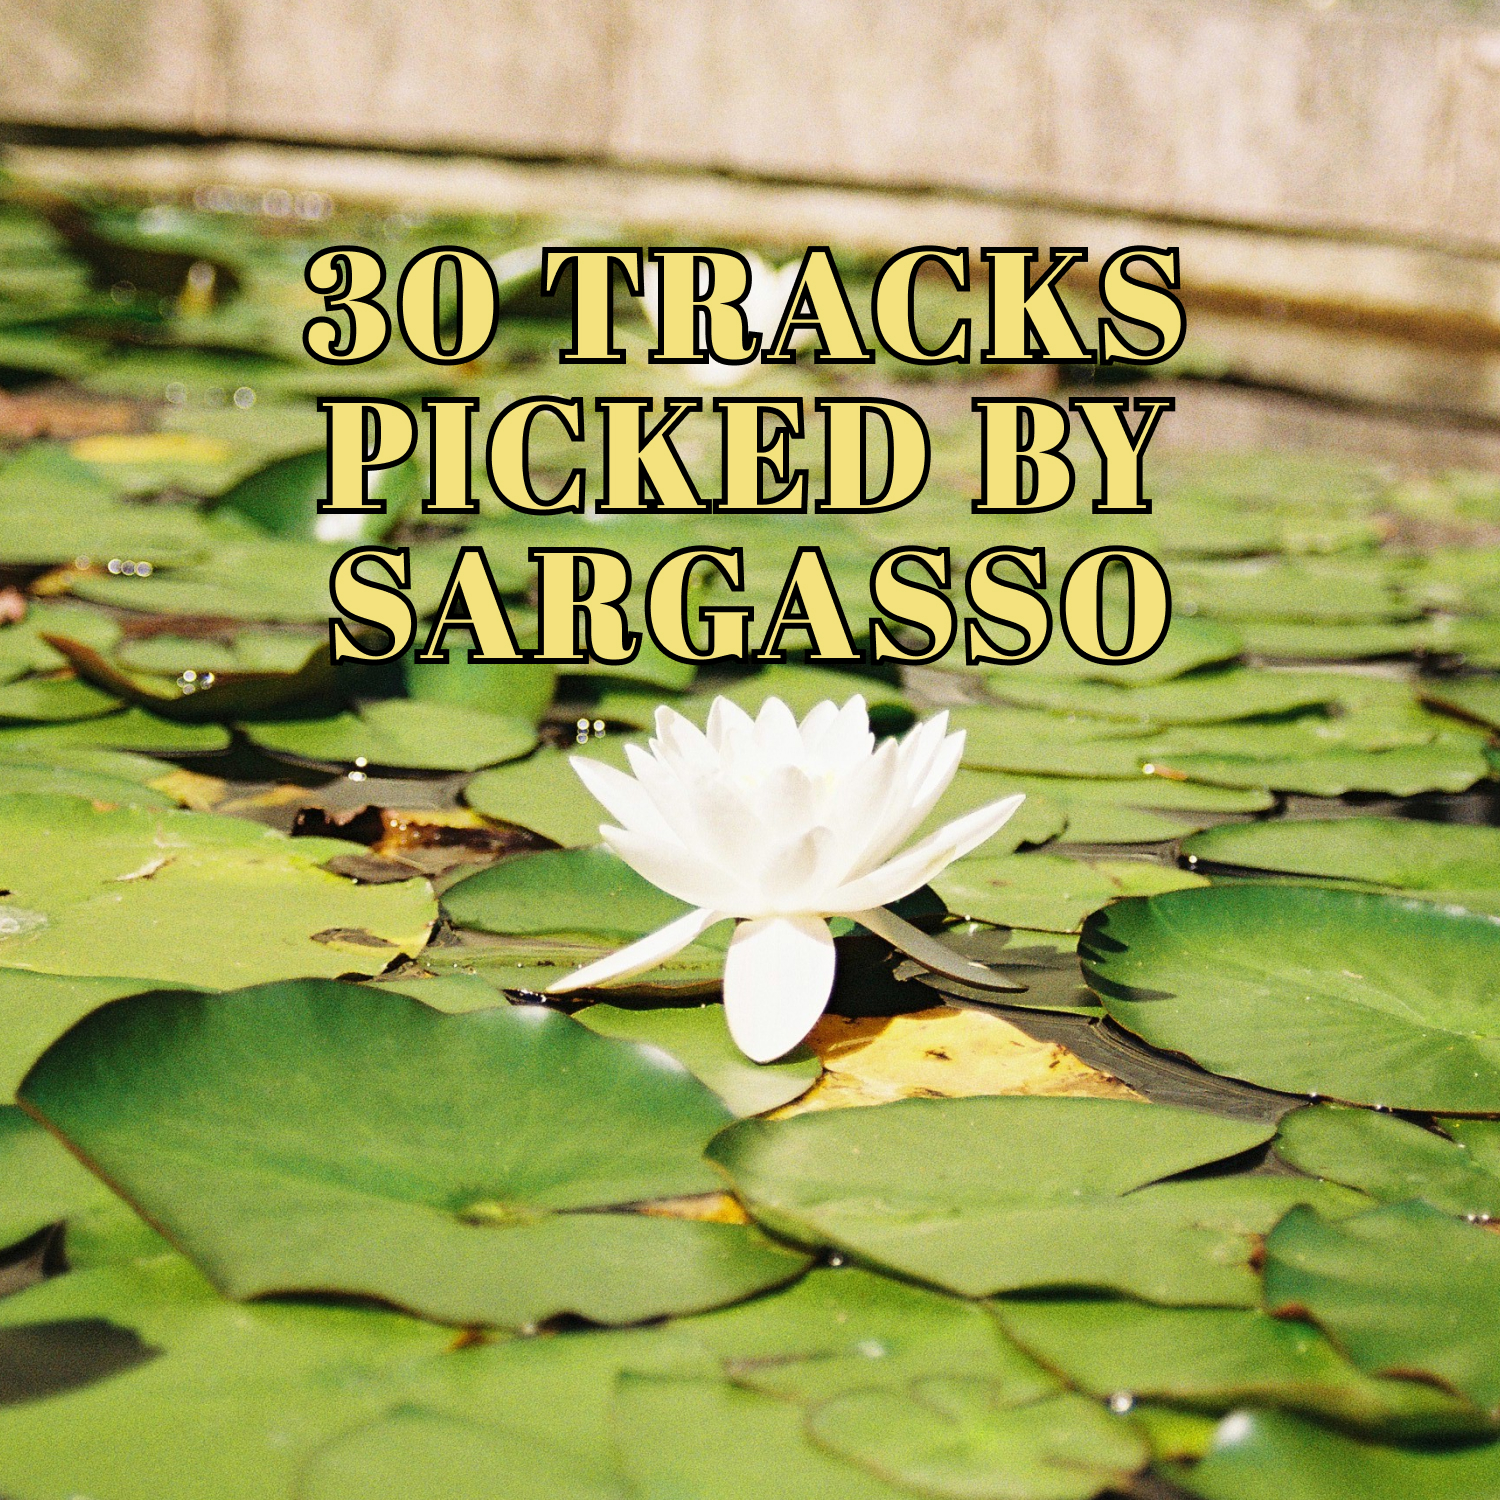 30 TRACKS PICKED BY SARGASSO